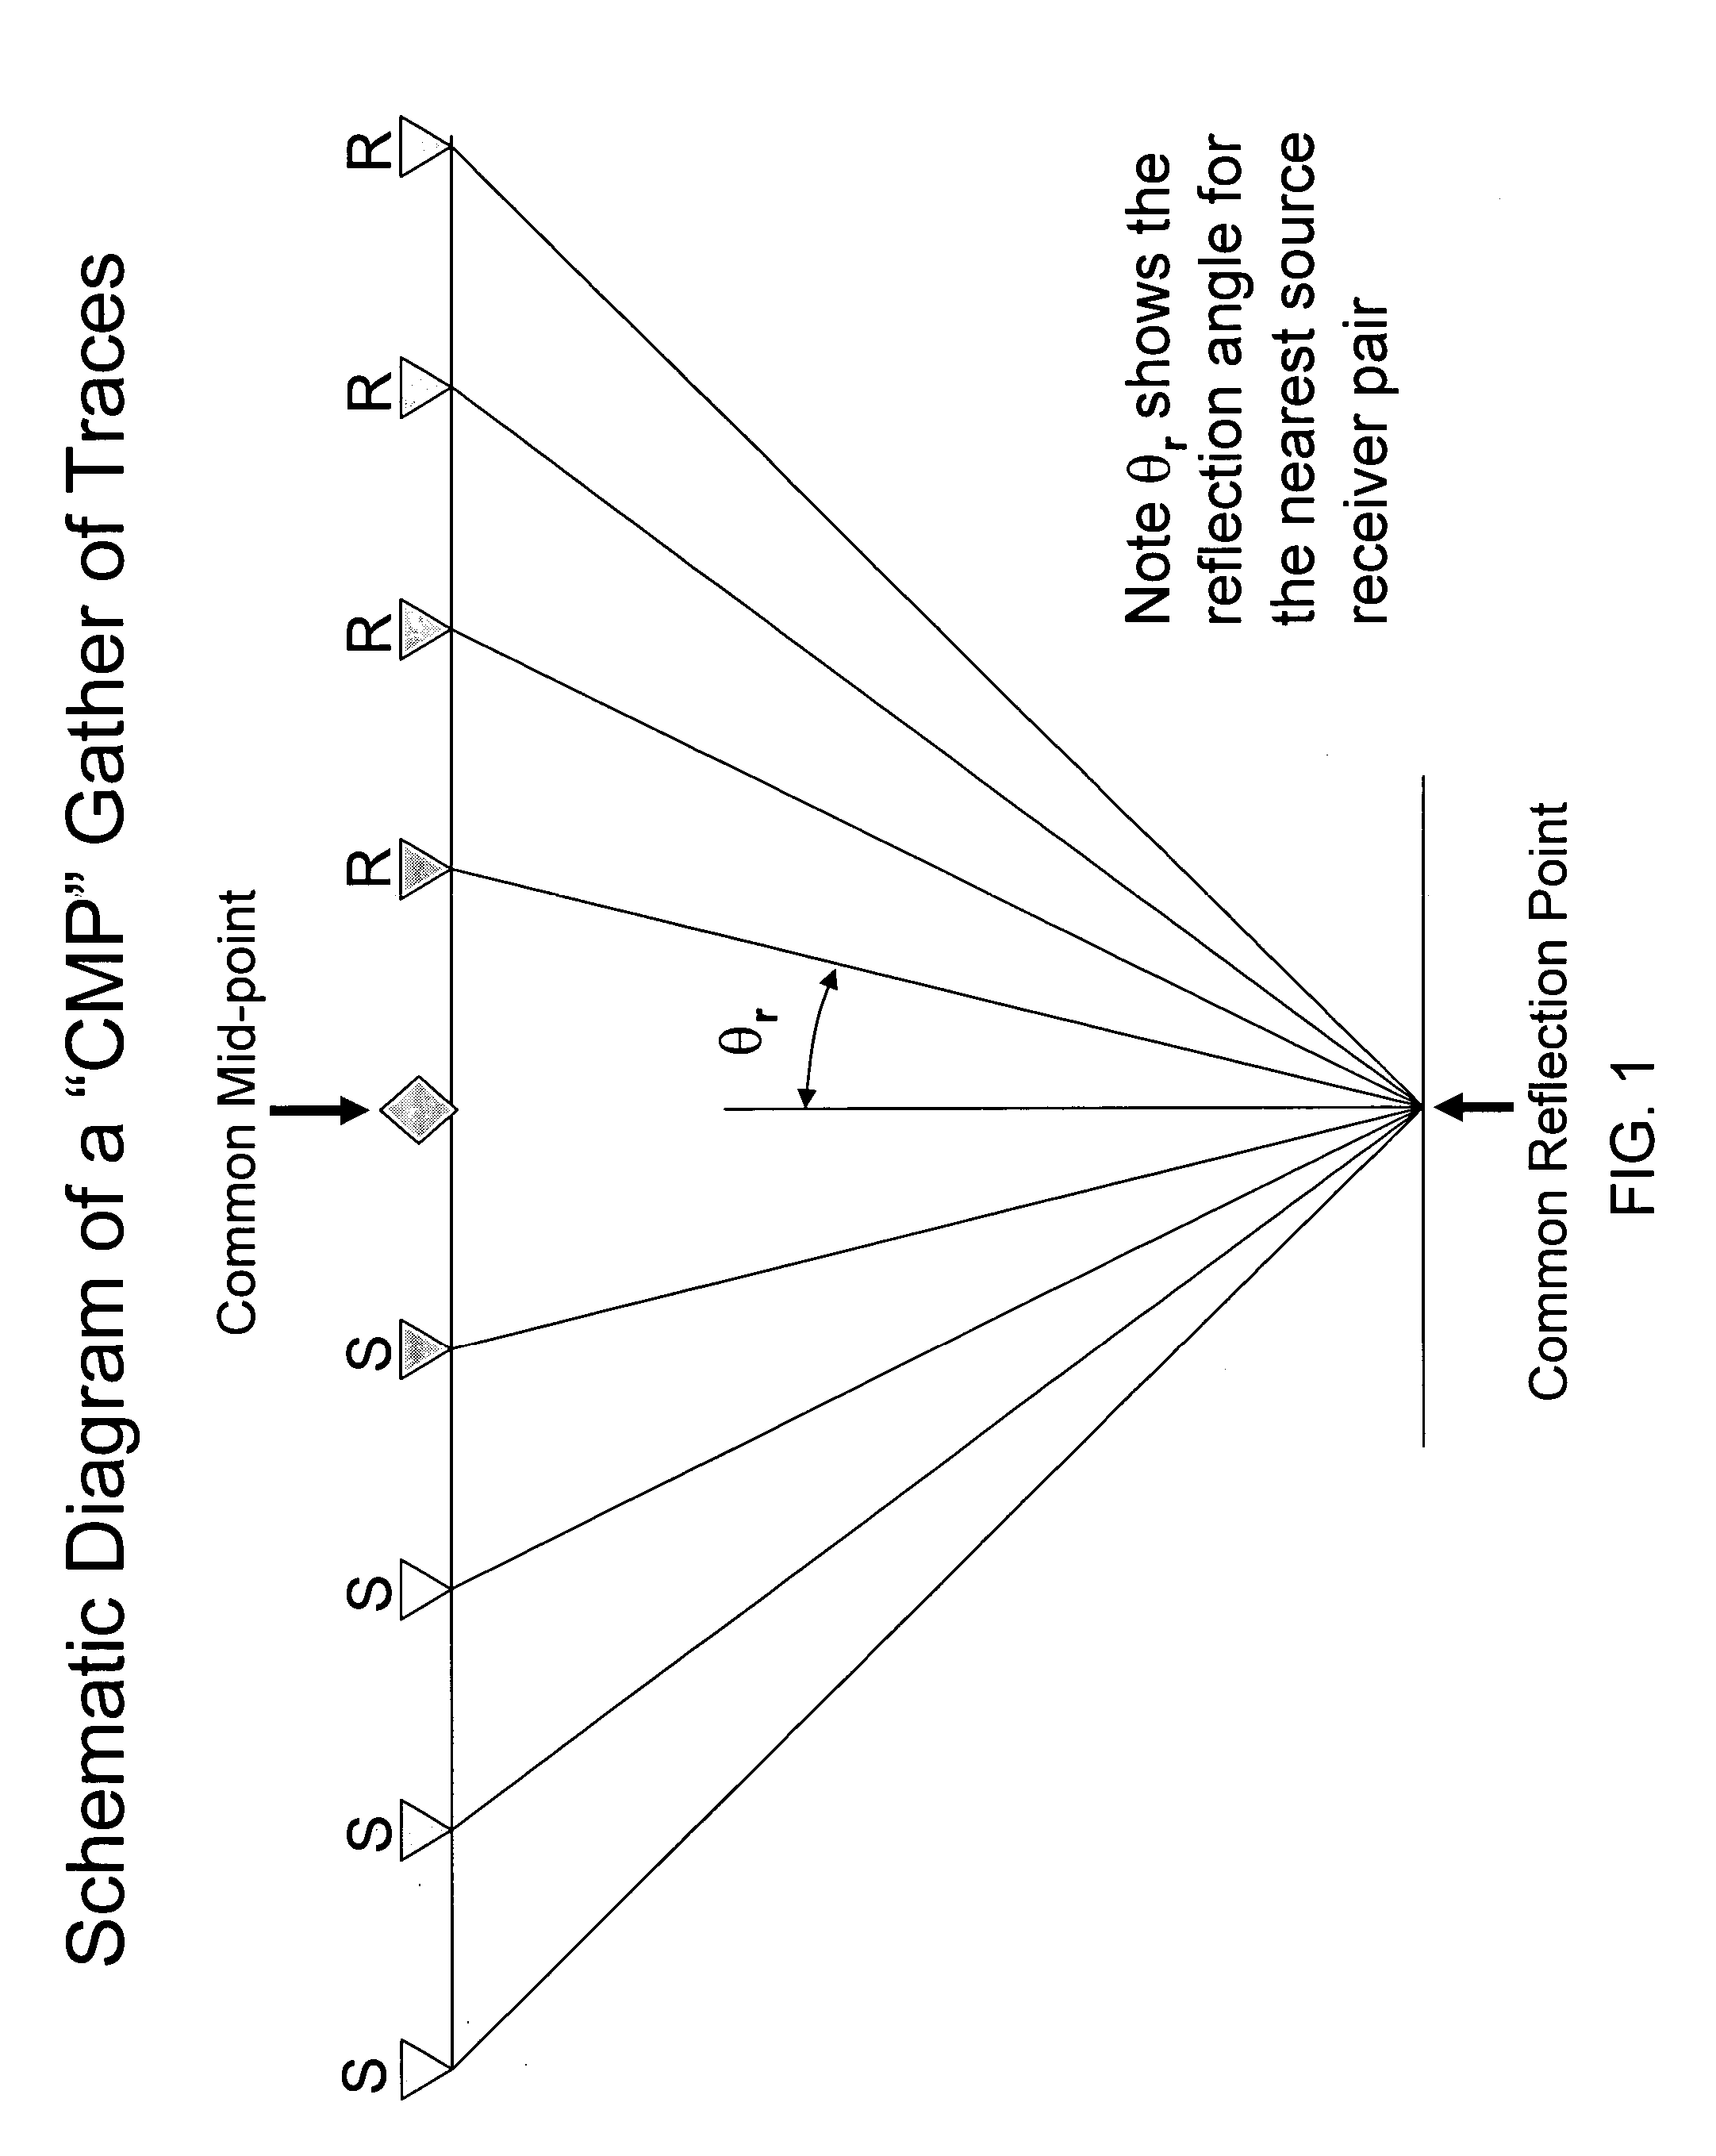 Method and apparatus for true relative amplitude correction of seismic data for normal moveout stretch effects